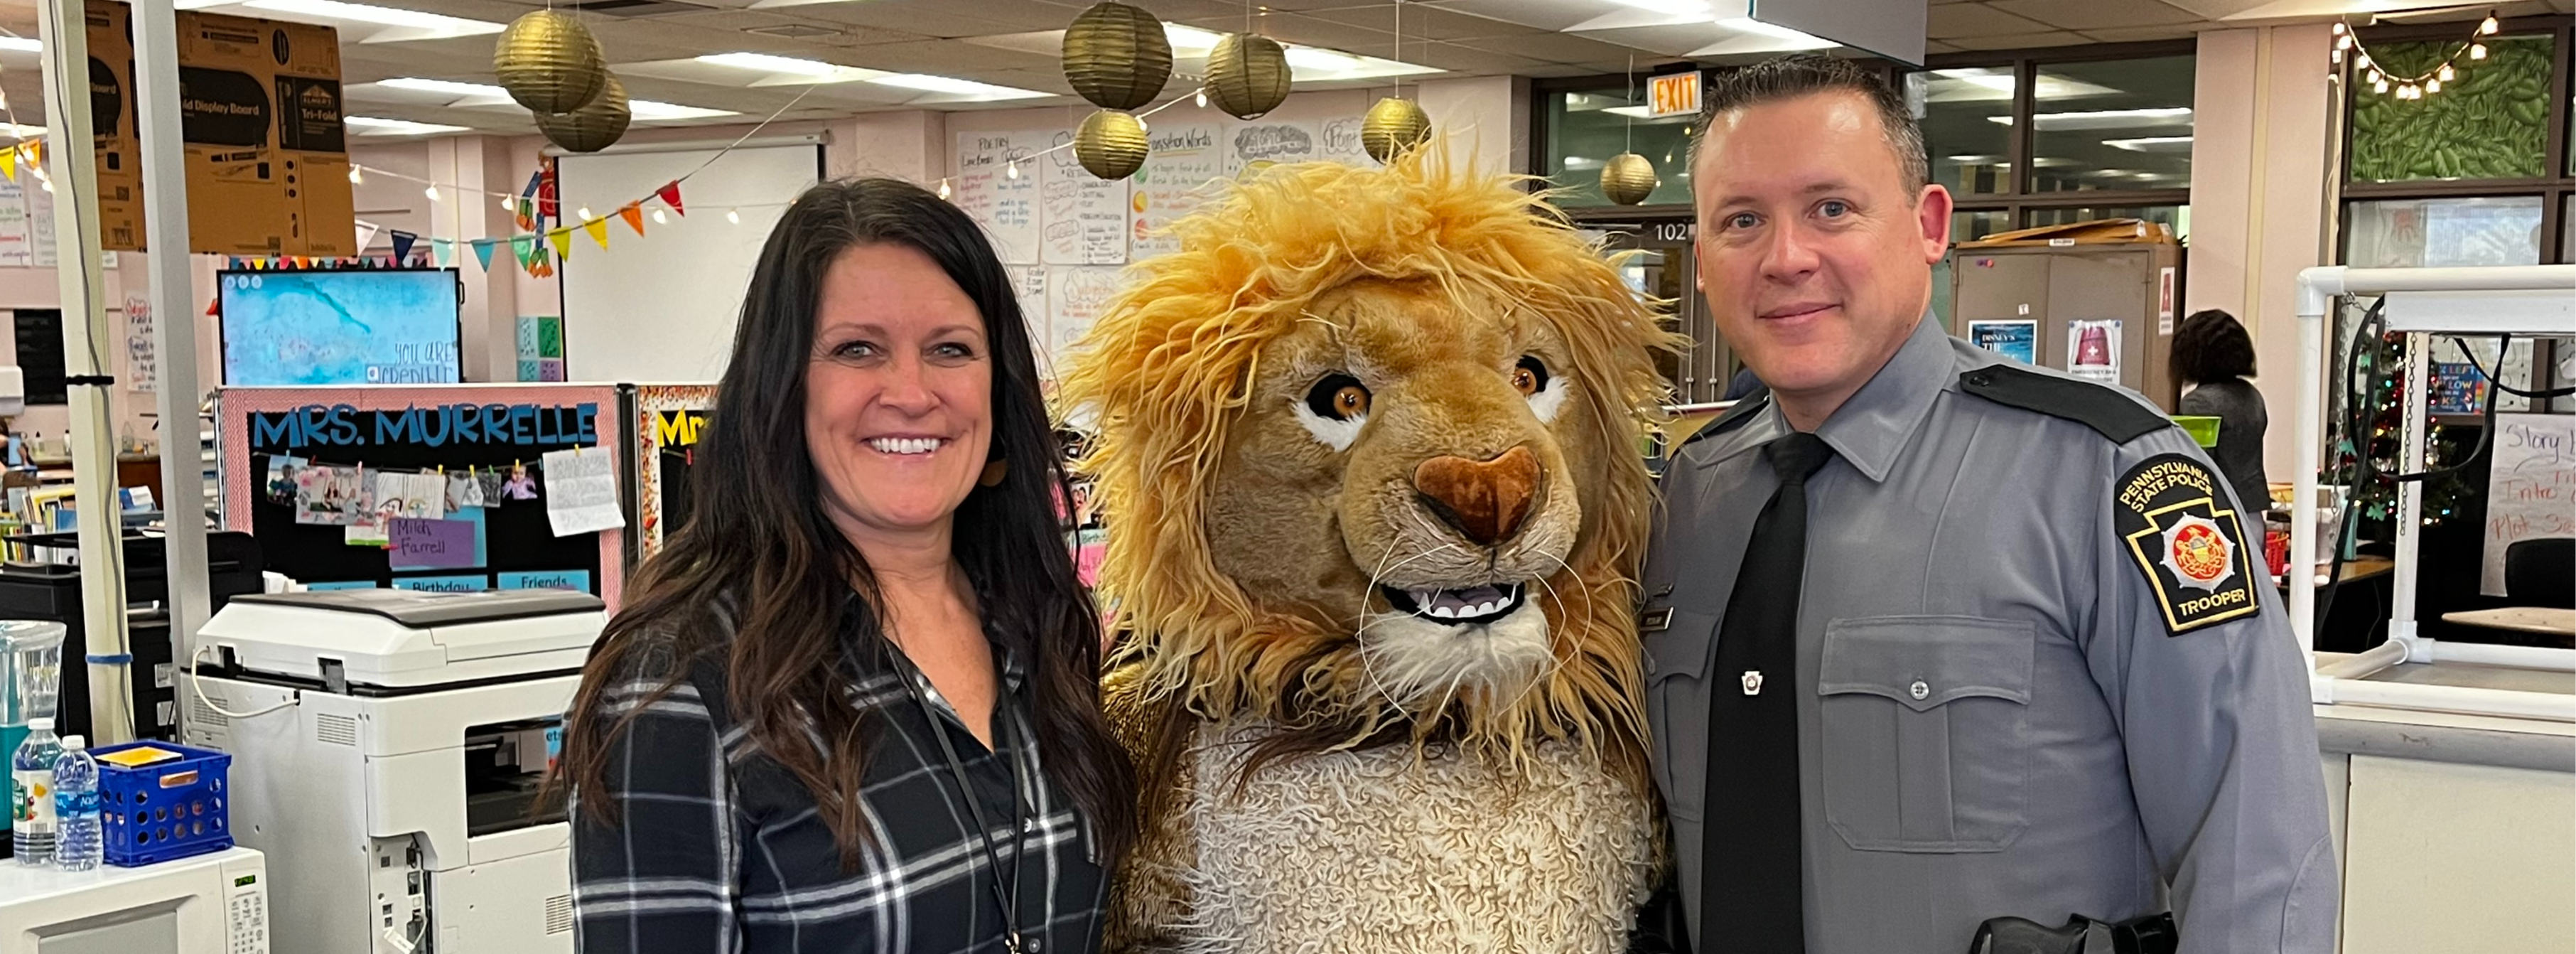 State Trooper with teacher and mascot